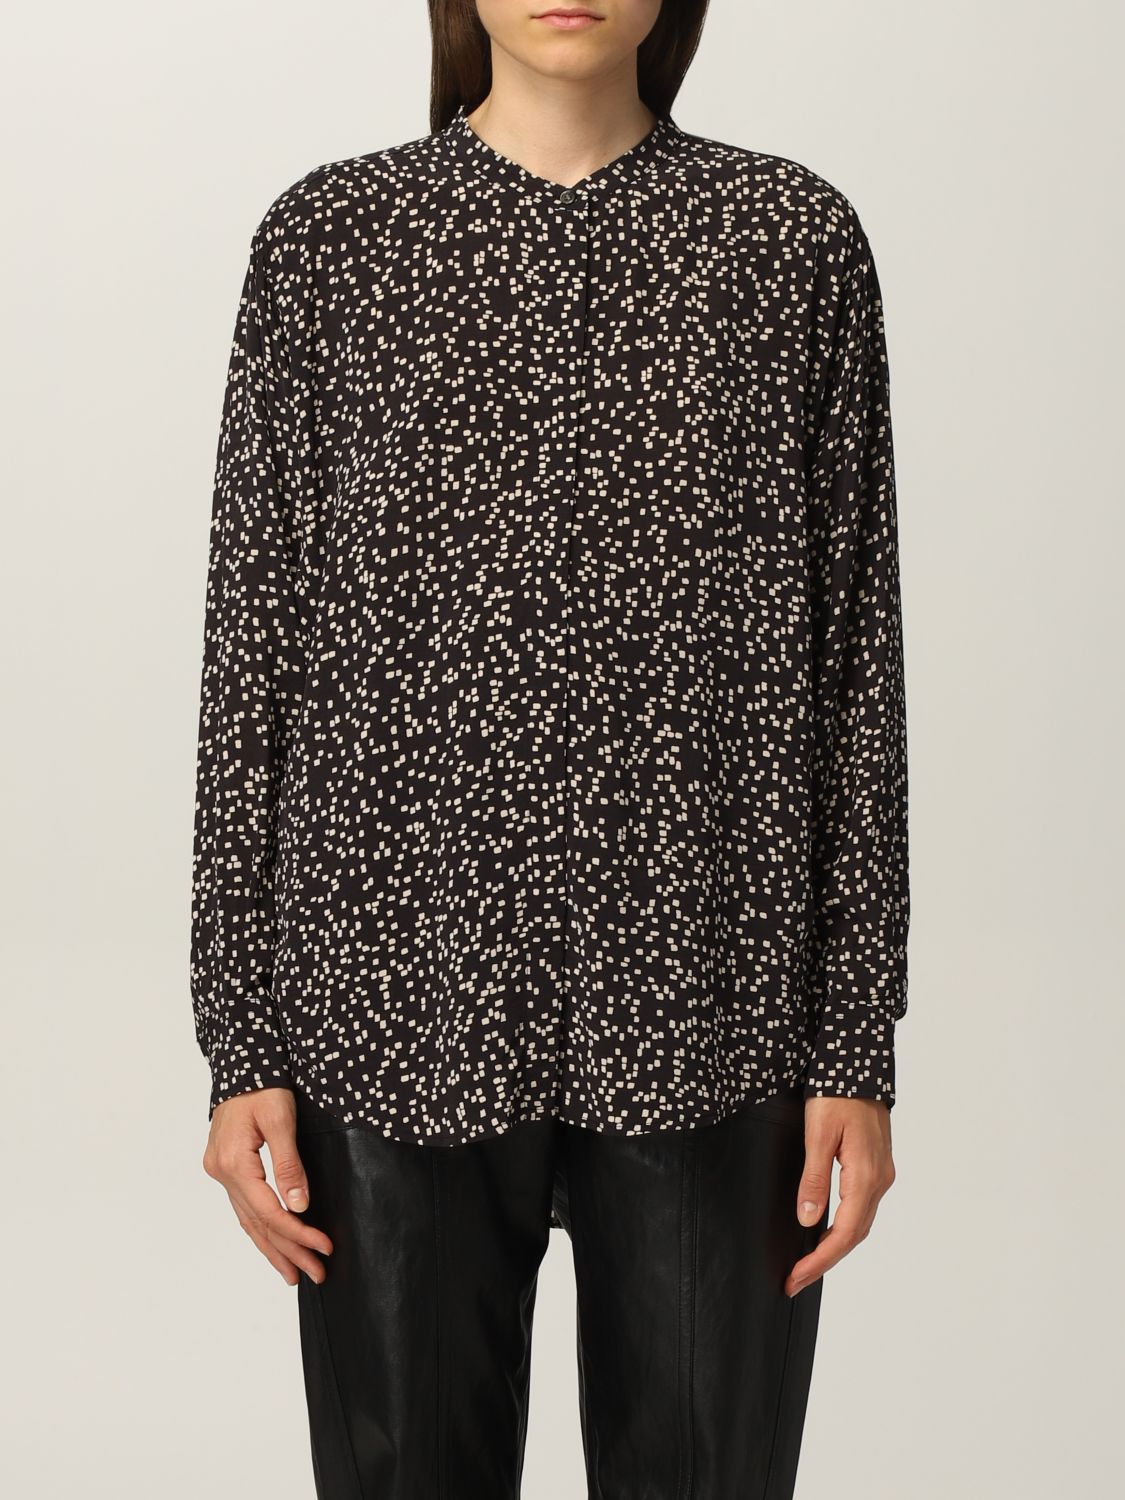 ISABEL MARANT ETOILE: cotton shirt with all print | Shirt Isabel Marant Etoile Women Black | Shirt Isabel Marant Etoile GIGLIO.COM